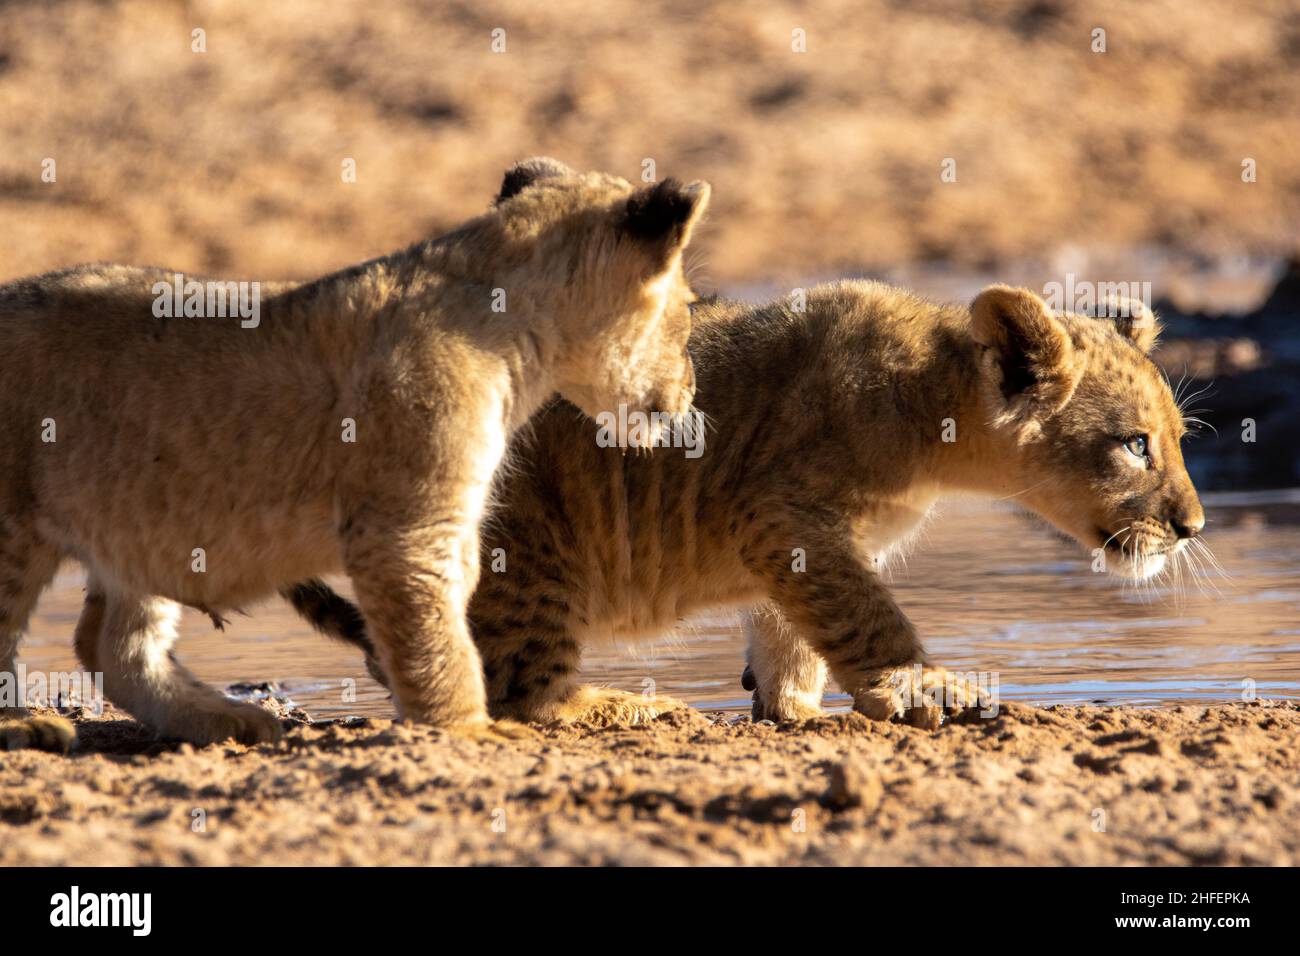 Lion cubs in the Kgalagadi Stock Photo